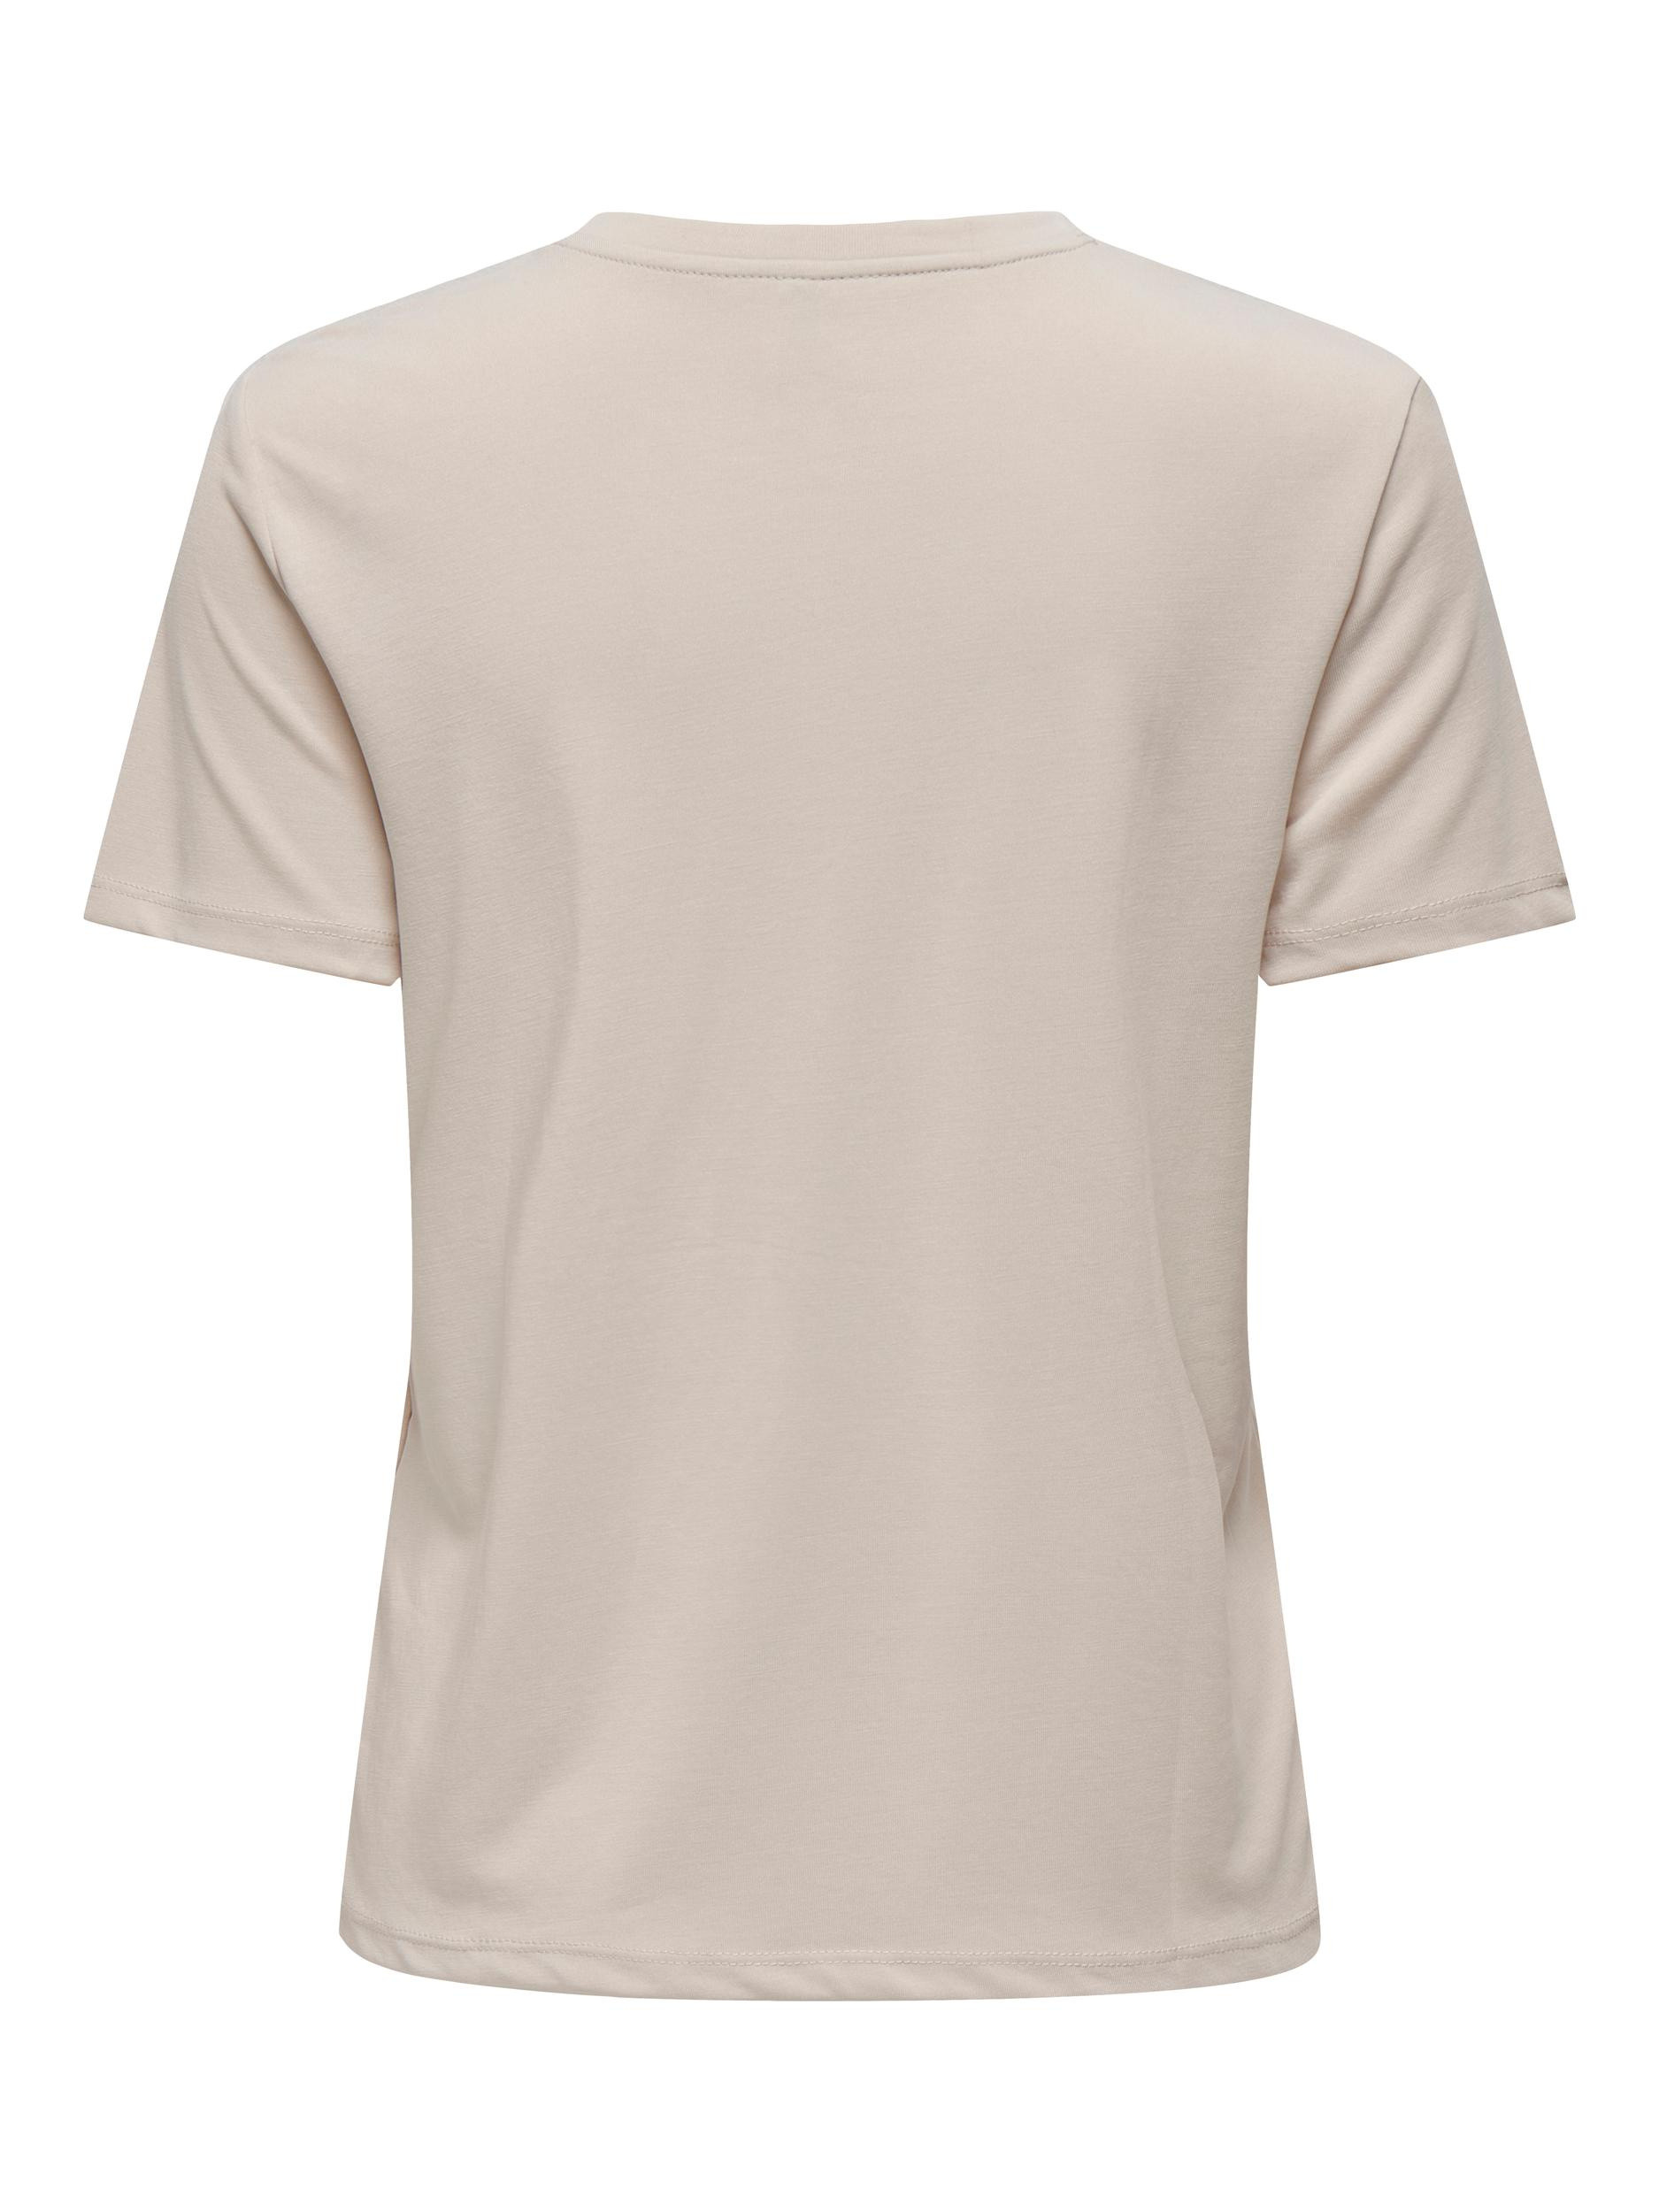 Only - T-shirt regular fit con stampa, Beige, large image number 1